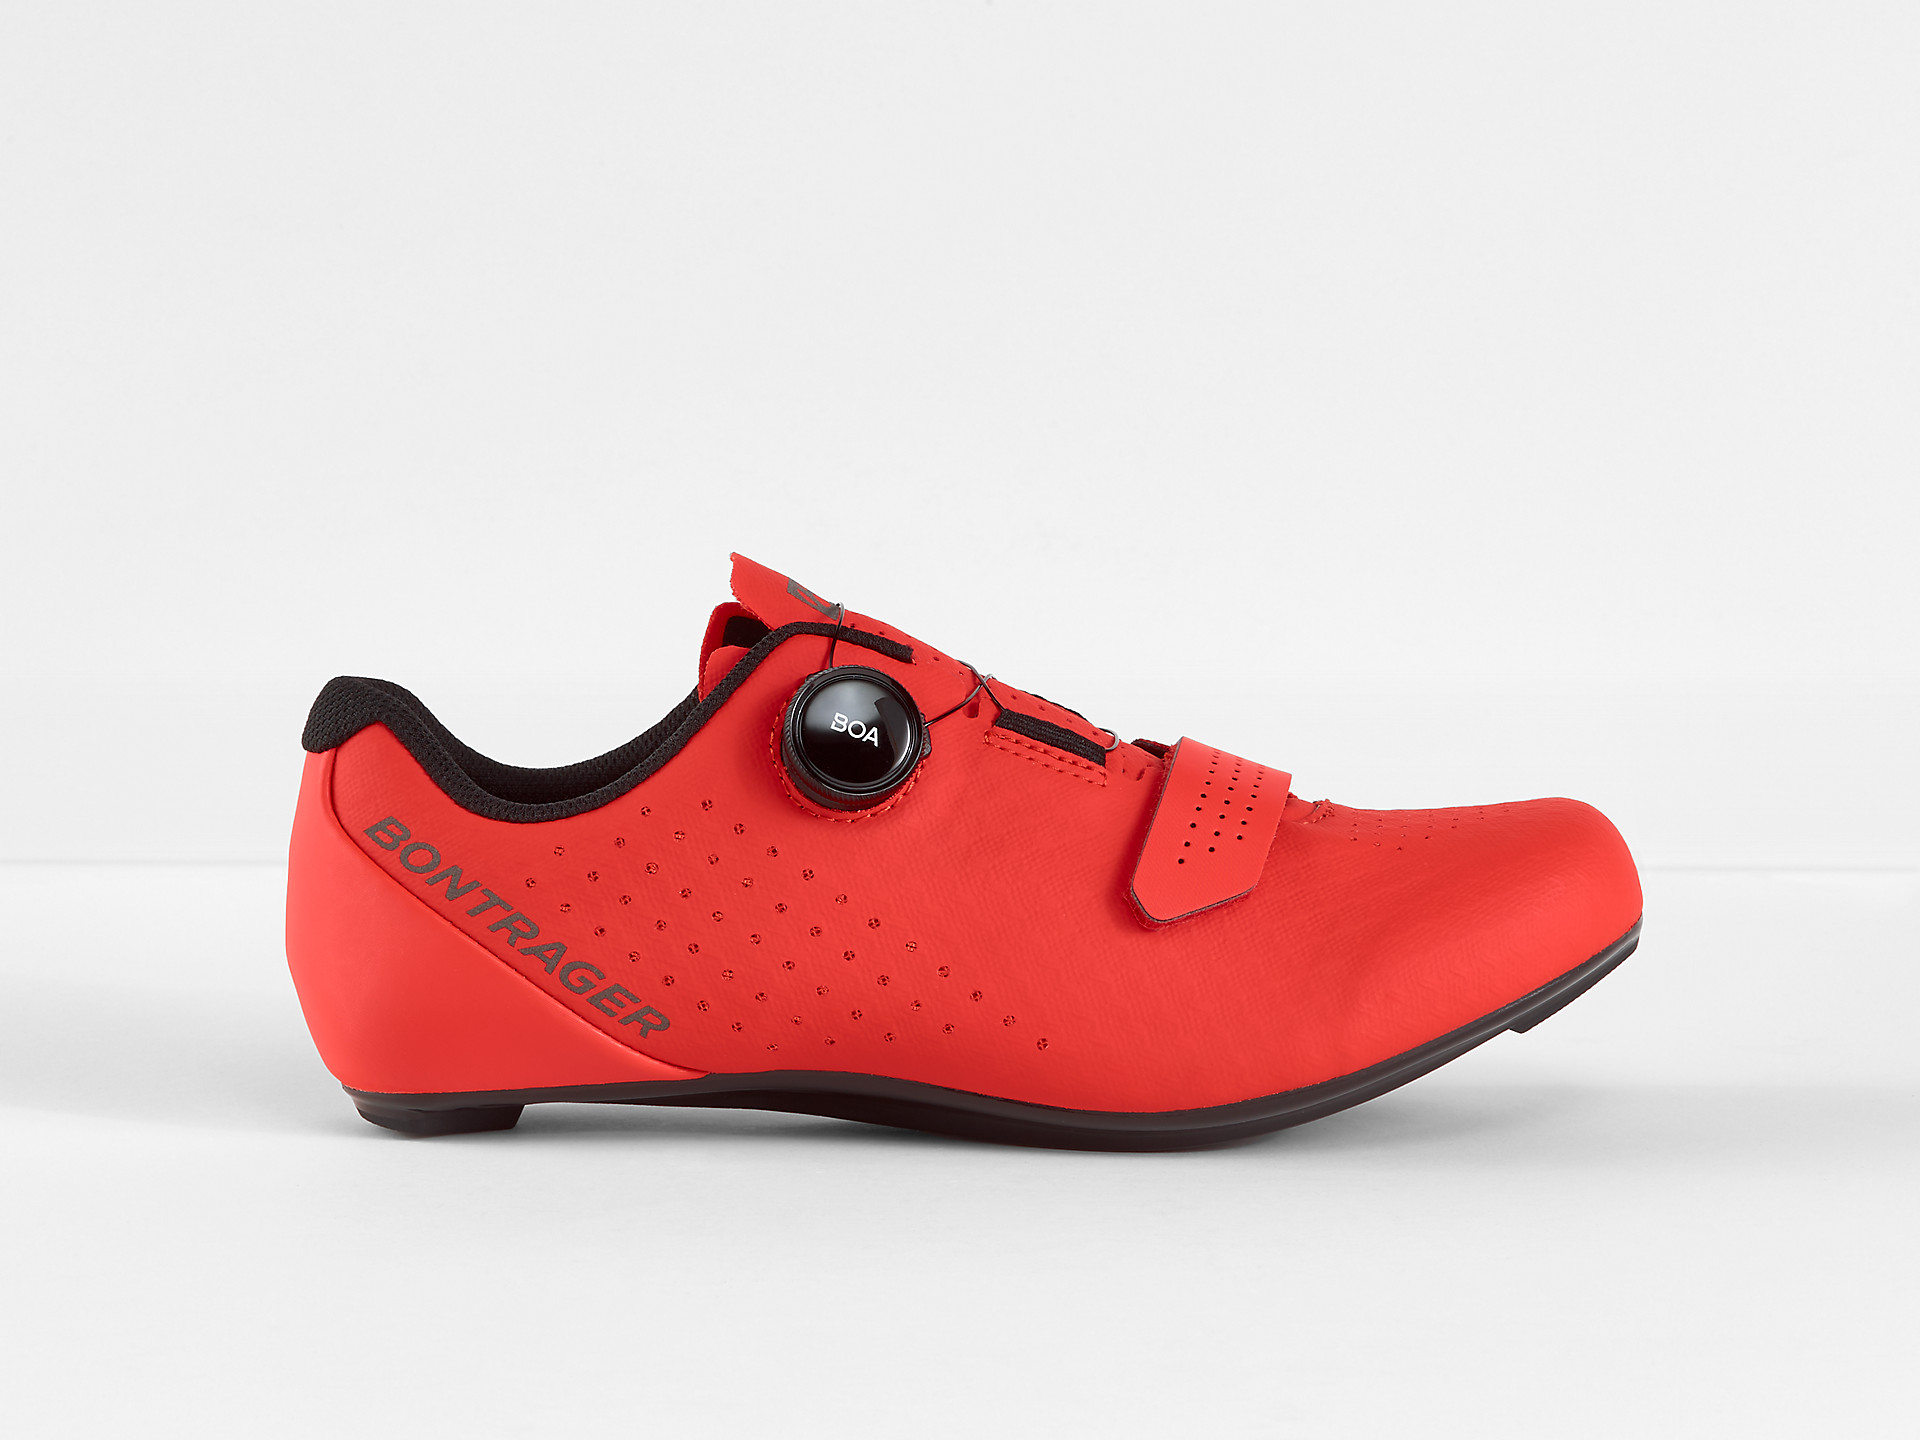 <a href="https://cycles-clement.be/product/chaussure-bont-circuit-race-42-red/">CHAUSSURE BONT CIRCUIT RACE 42 RED</a>